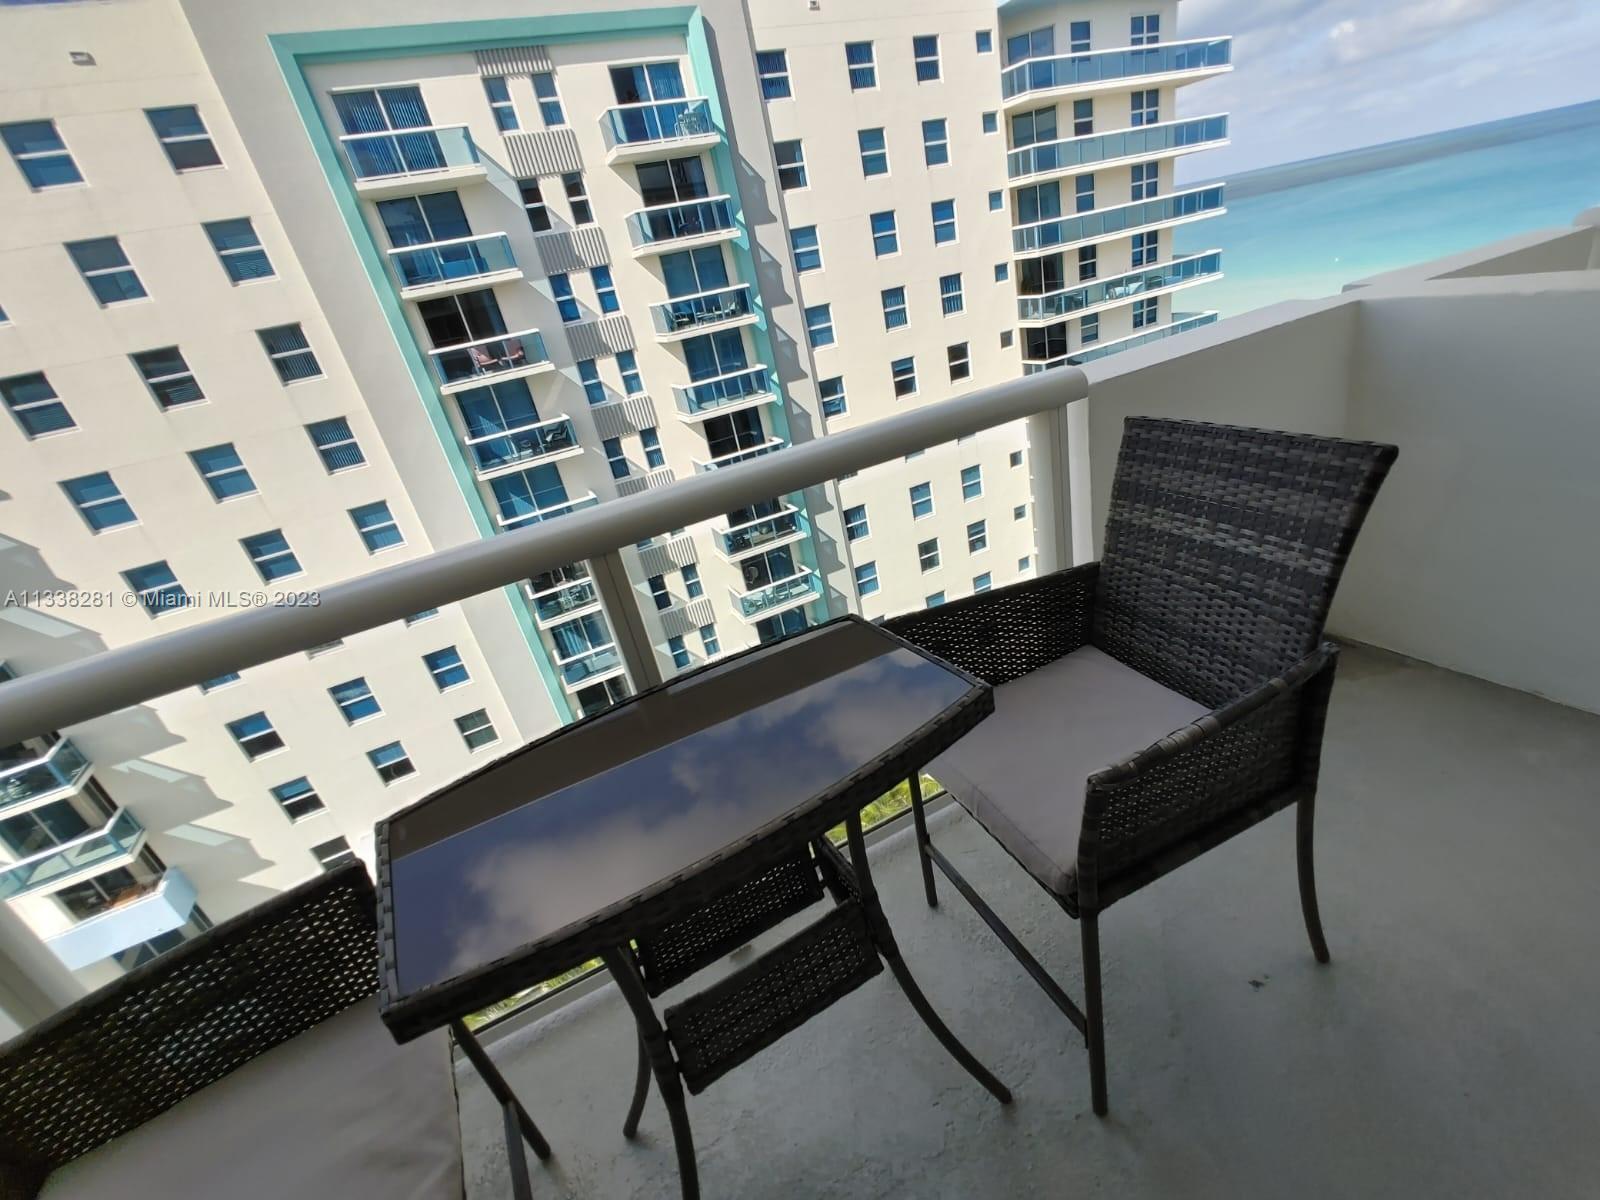 Exclusive OPPORTUNITY: This elegant, modern, bright, spacious, newly renovated 1 BR oceanfront condo will make for a perfect turnkey vacation home or primary residence! Offered fully furnished and ready to move in. Perfect for investors!!! Mix use since short term rentals allowed when you are not using your unit. Just bring the toothbrush and some beach's clothes! Building has just been renovated. Pool, gym, barbecue area, direct beach access. Close to Bal Harbor Shops, supermarkets & restaurants. Next door to the Four Seasons. Surfside is a boutique upscale beachfront community, offering unique high-end small-town experience. Building amenities: laundry room on each floor, 24/7 valet attendant, one garage parking space, beachfront pool, gym with ocean view, picnic, and BBQ area.